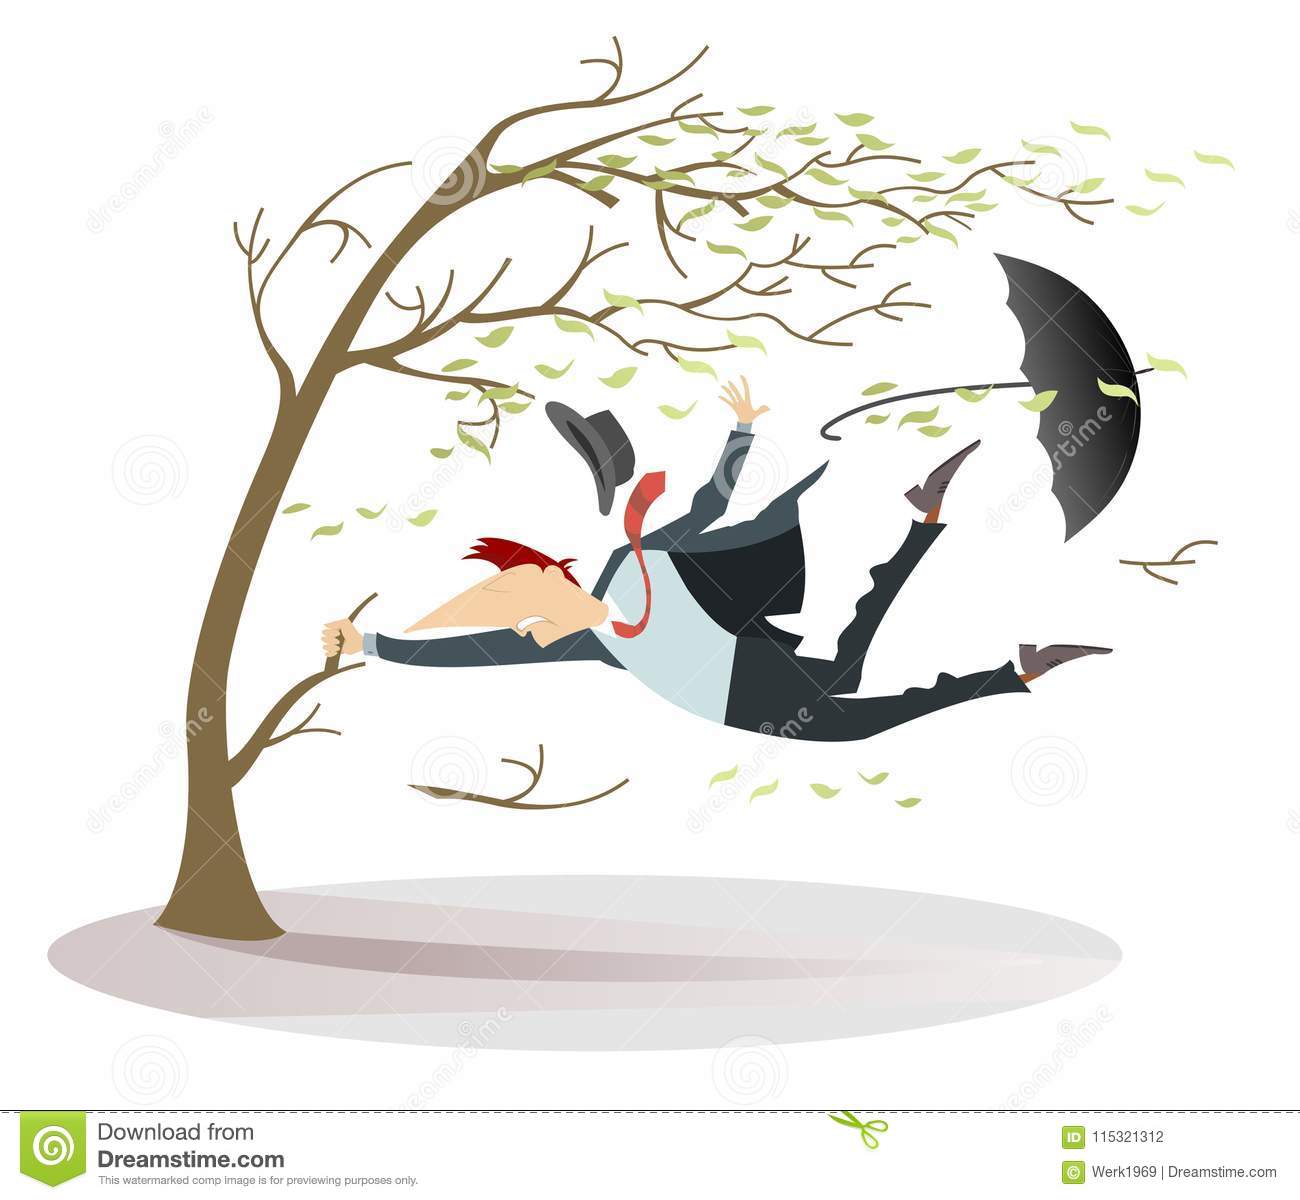 strong-wind-flying-leaves-man-lost-his-hat-umbrella-trying-to-keep-his-life-catching-tree-isolated-white-115321312